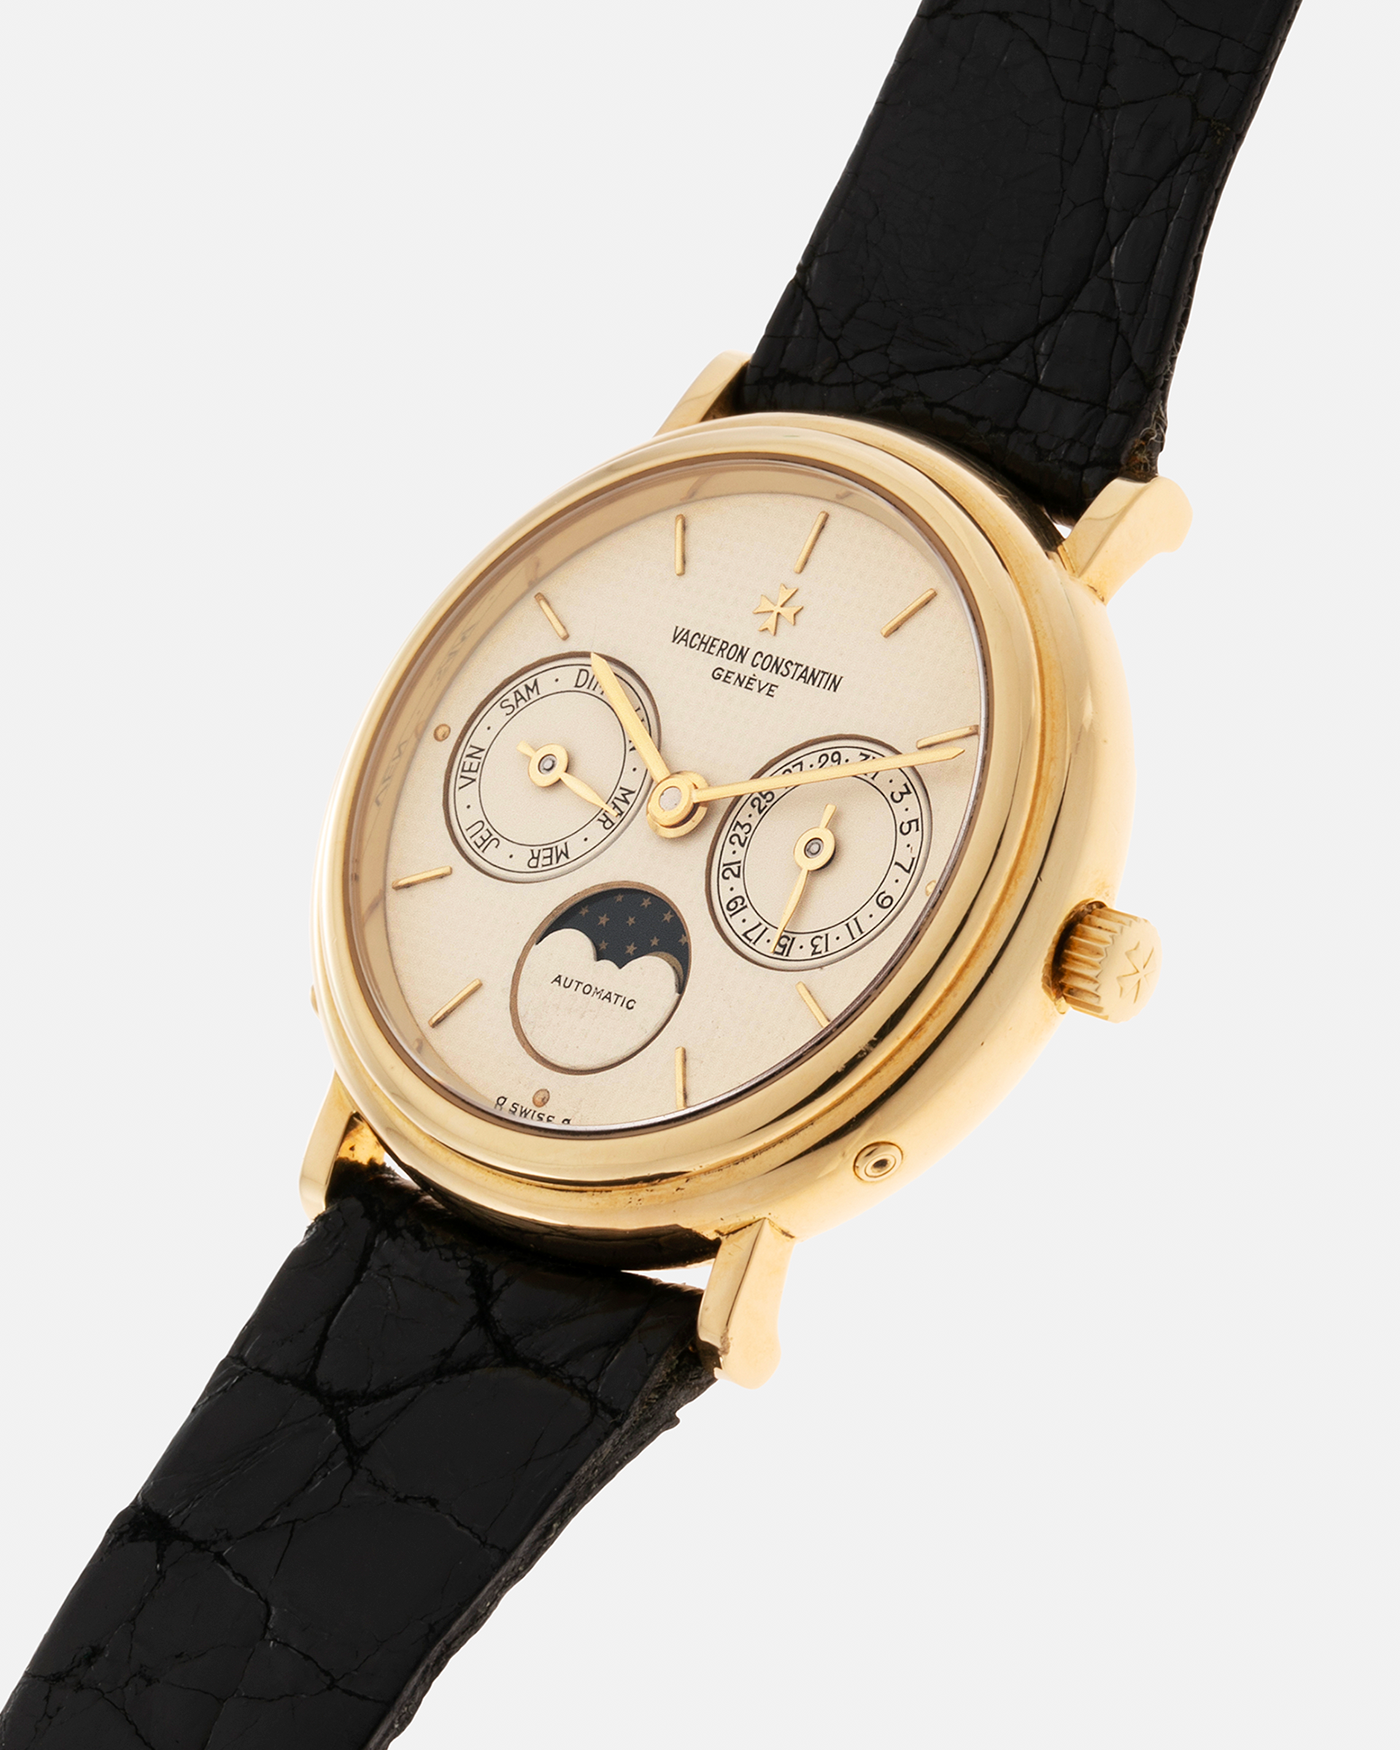 Brand: Vacheron Constantin Year: 1990’s Model: Day-Date Moonphase Reference Number: 46009 Material: 18-carat Yellow Gold Movement: Vacheron Constantin Cal. 1126 QS, Self-Winding Case Diameter: 34mm Bracelet: Vacheron Constantin Black Lizard Leather Strap with Signed 18-carat Yellow Gold Tang Buckle